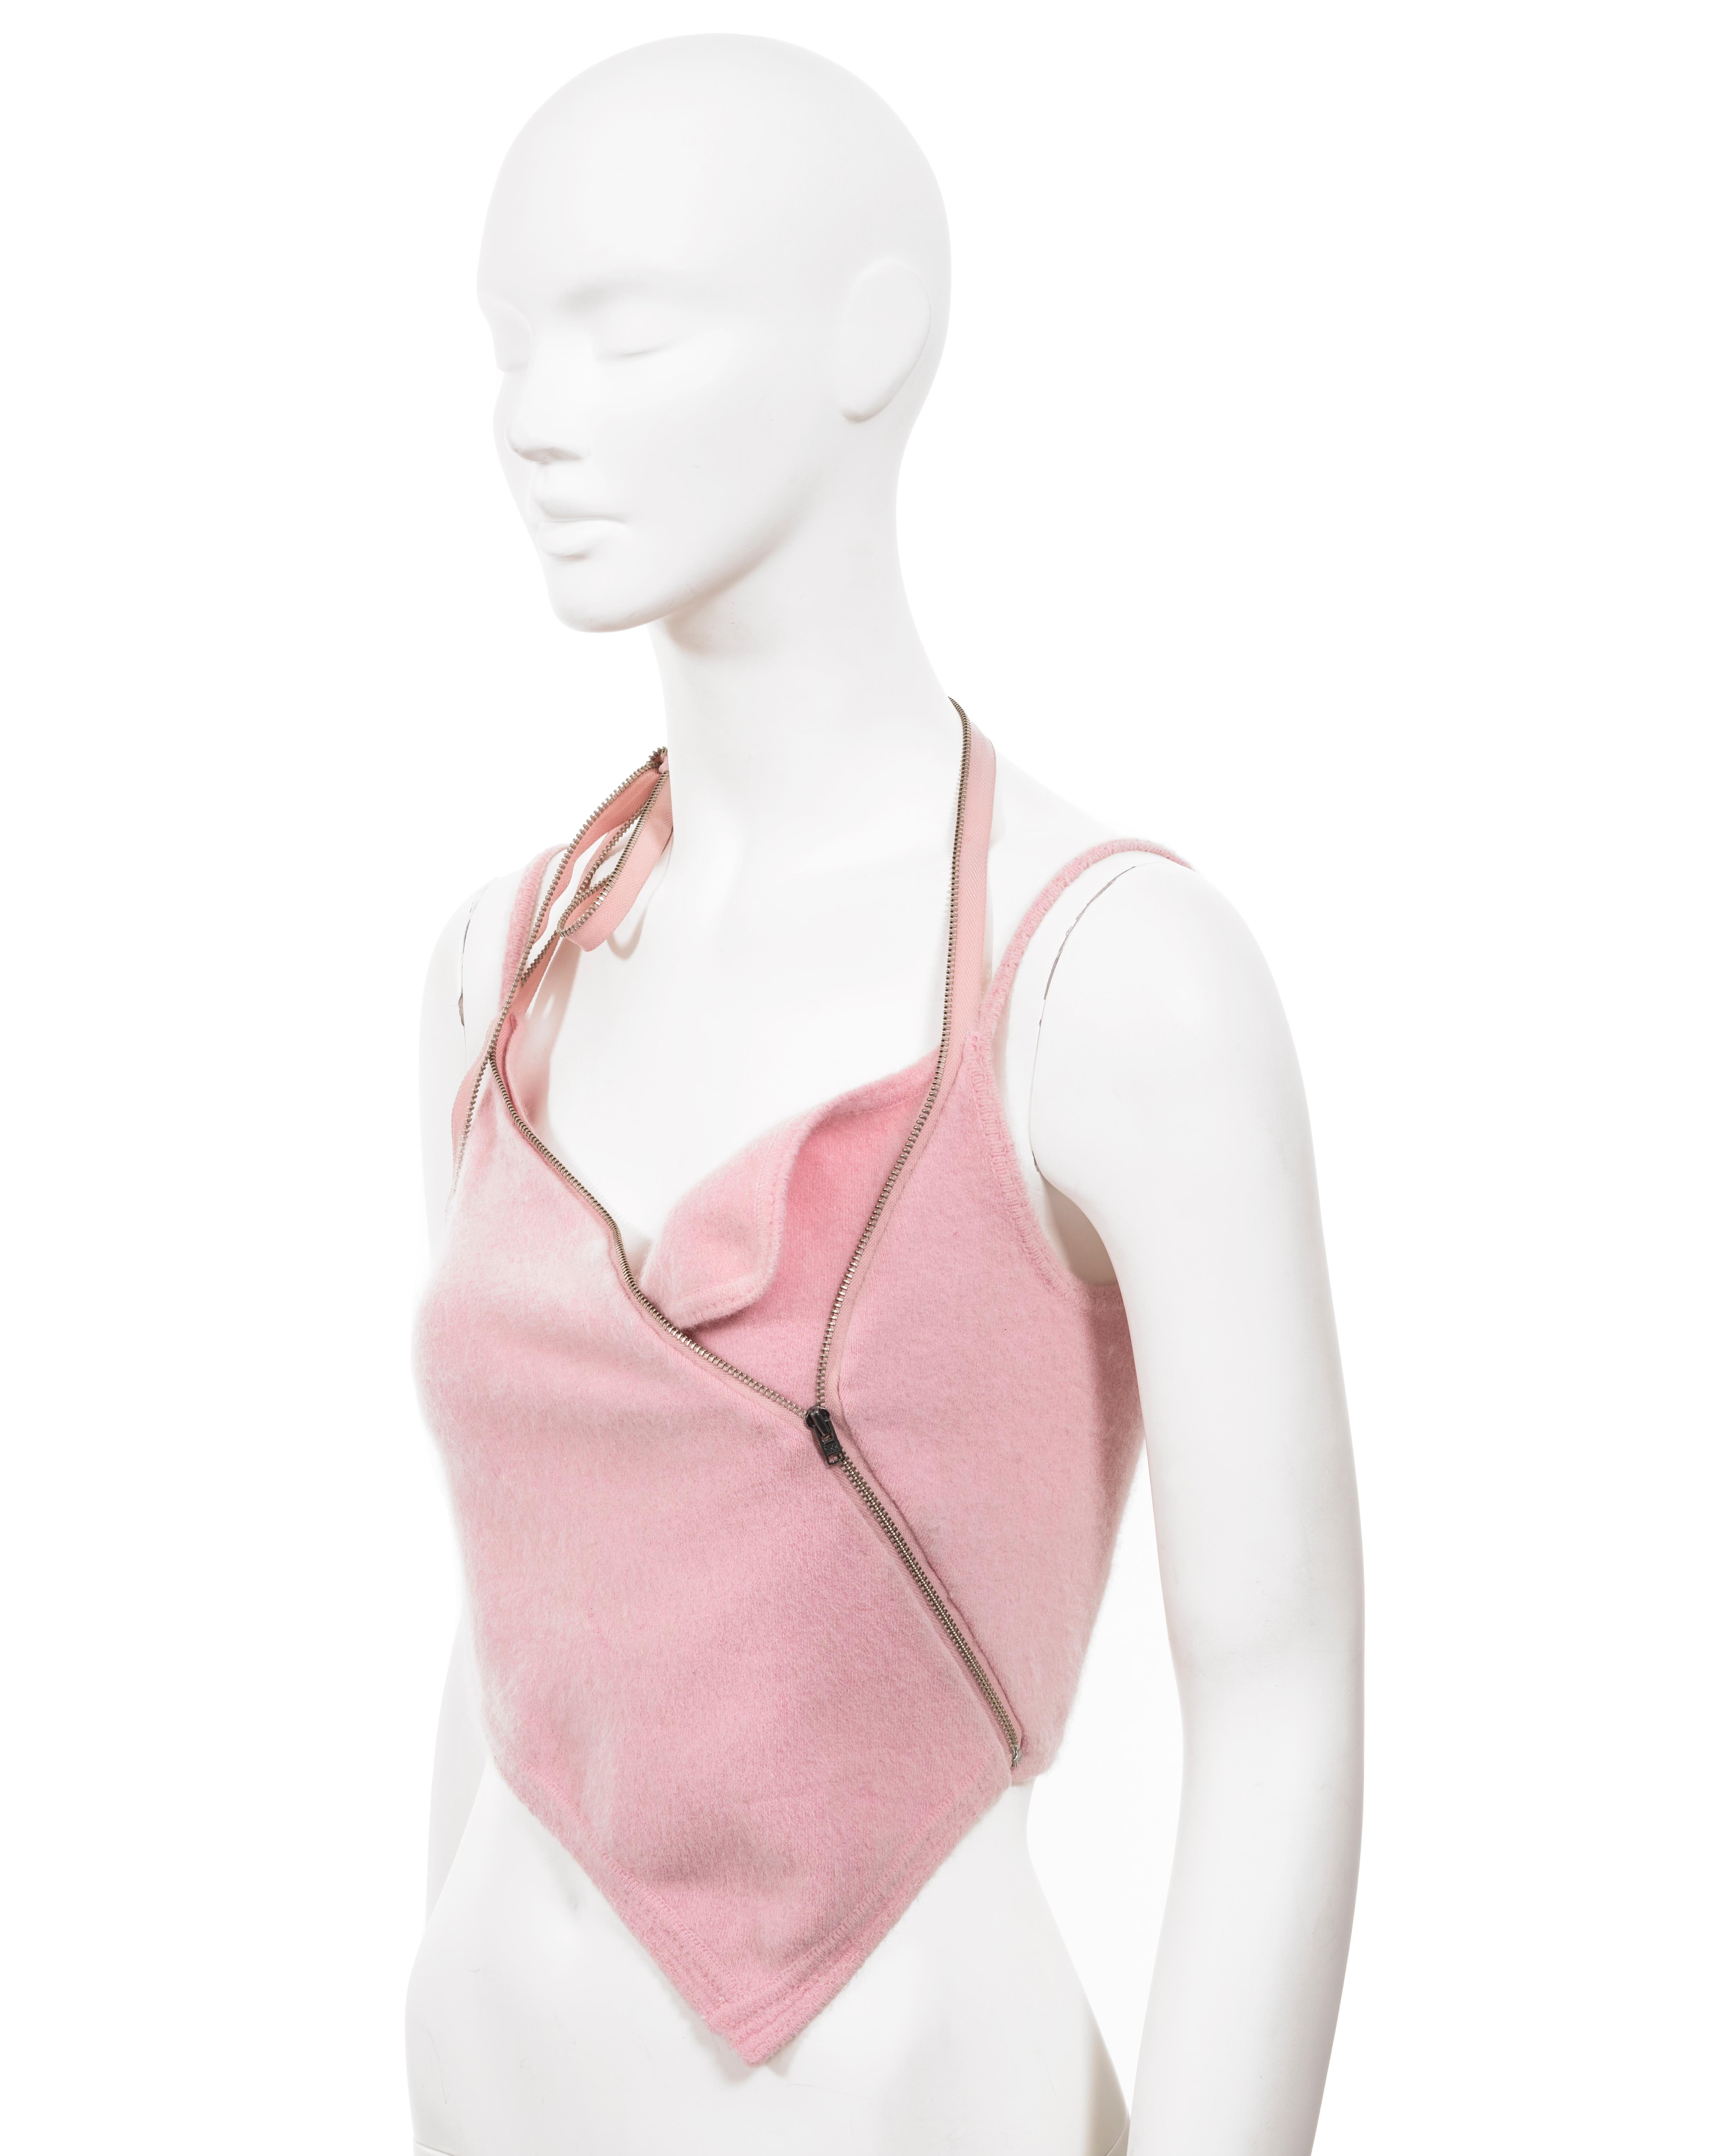 John Galliano baby pink fuzzy knitted crop top with zippers, ss 2000 For Sale 6